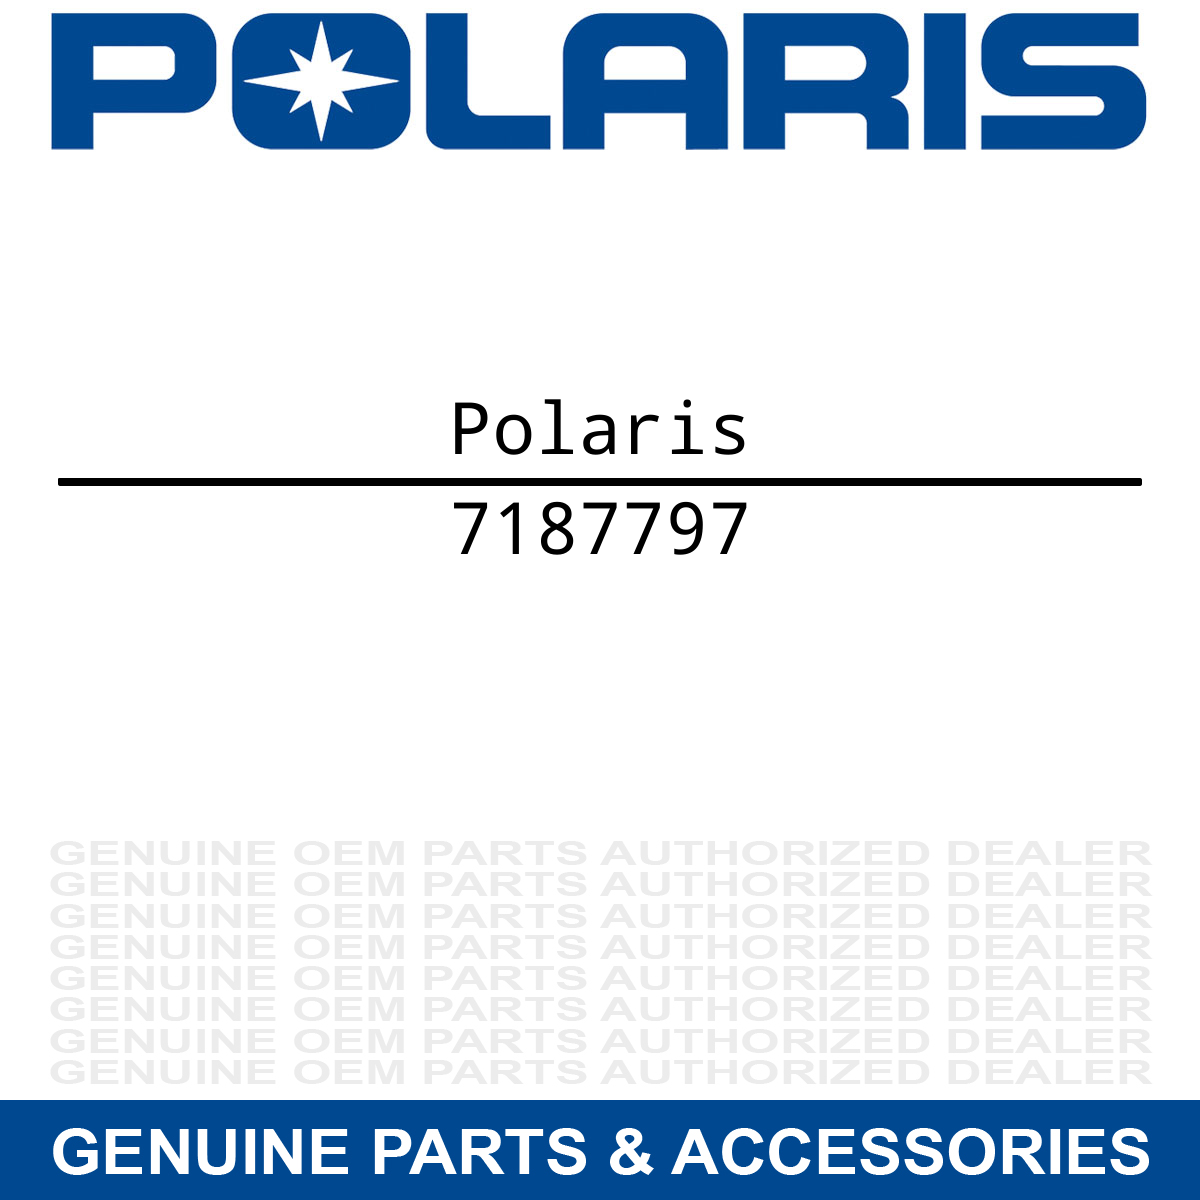 Polaris 7187797 Right Hand "Pro" Side Panel Decal Switchback Rush Pro-RMK 155 163 174 600 800